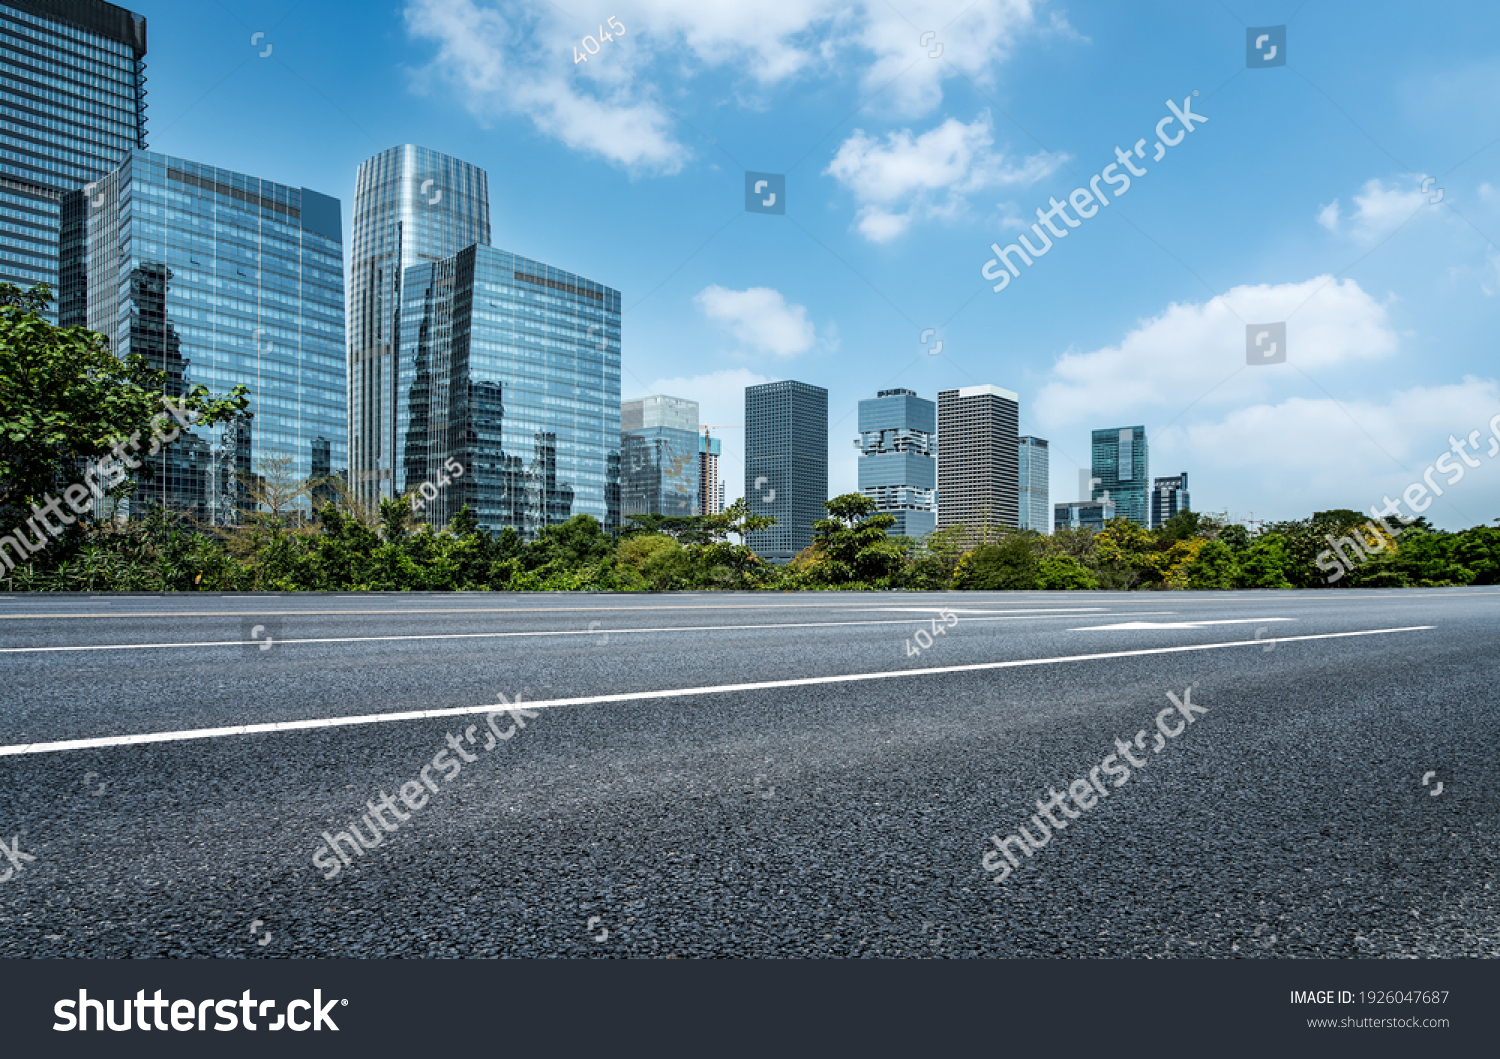 Highway skyline and city buildings #1926047687